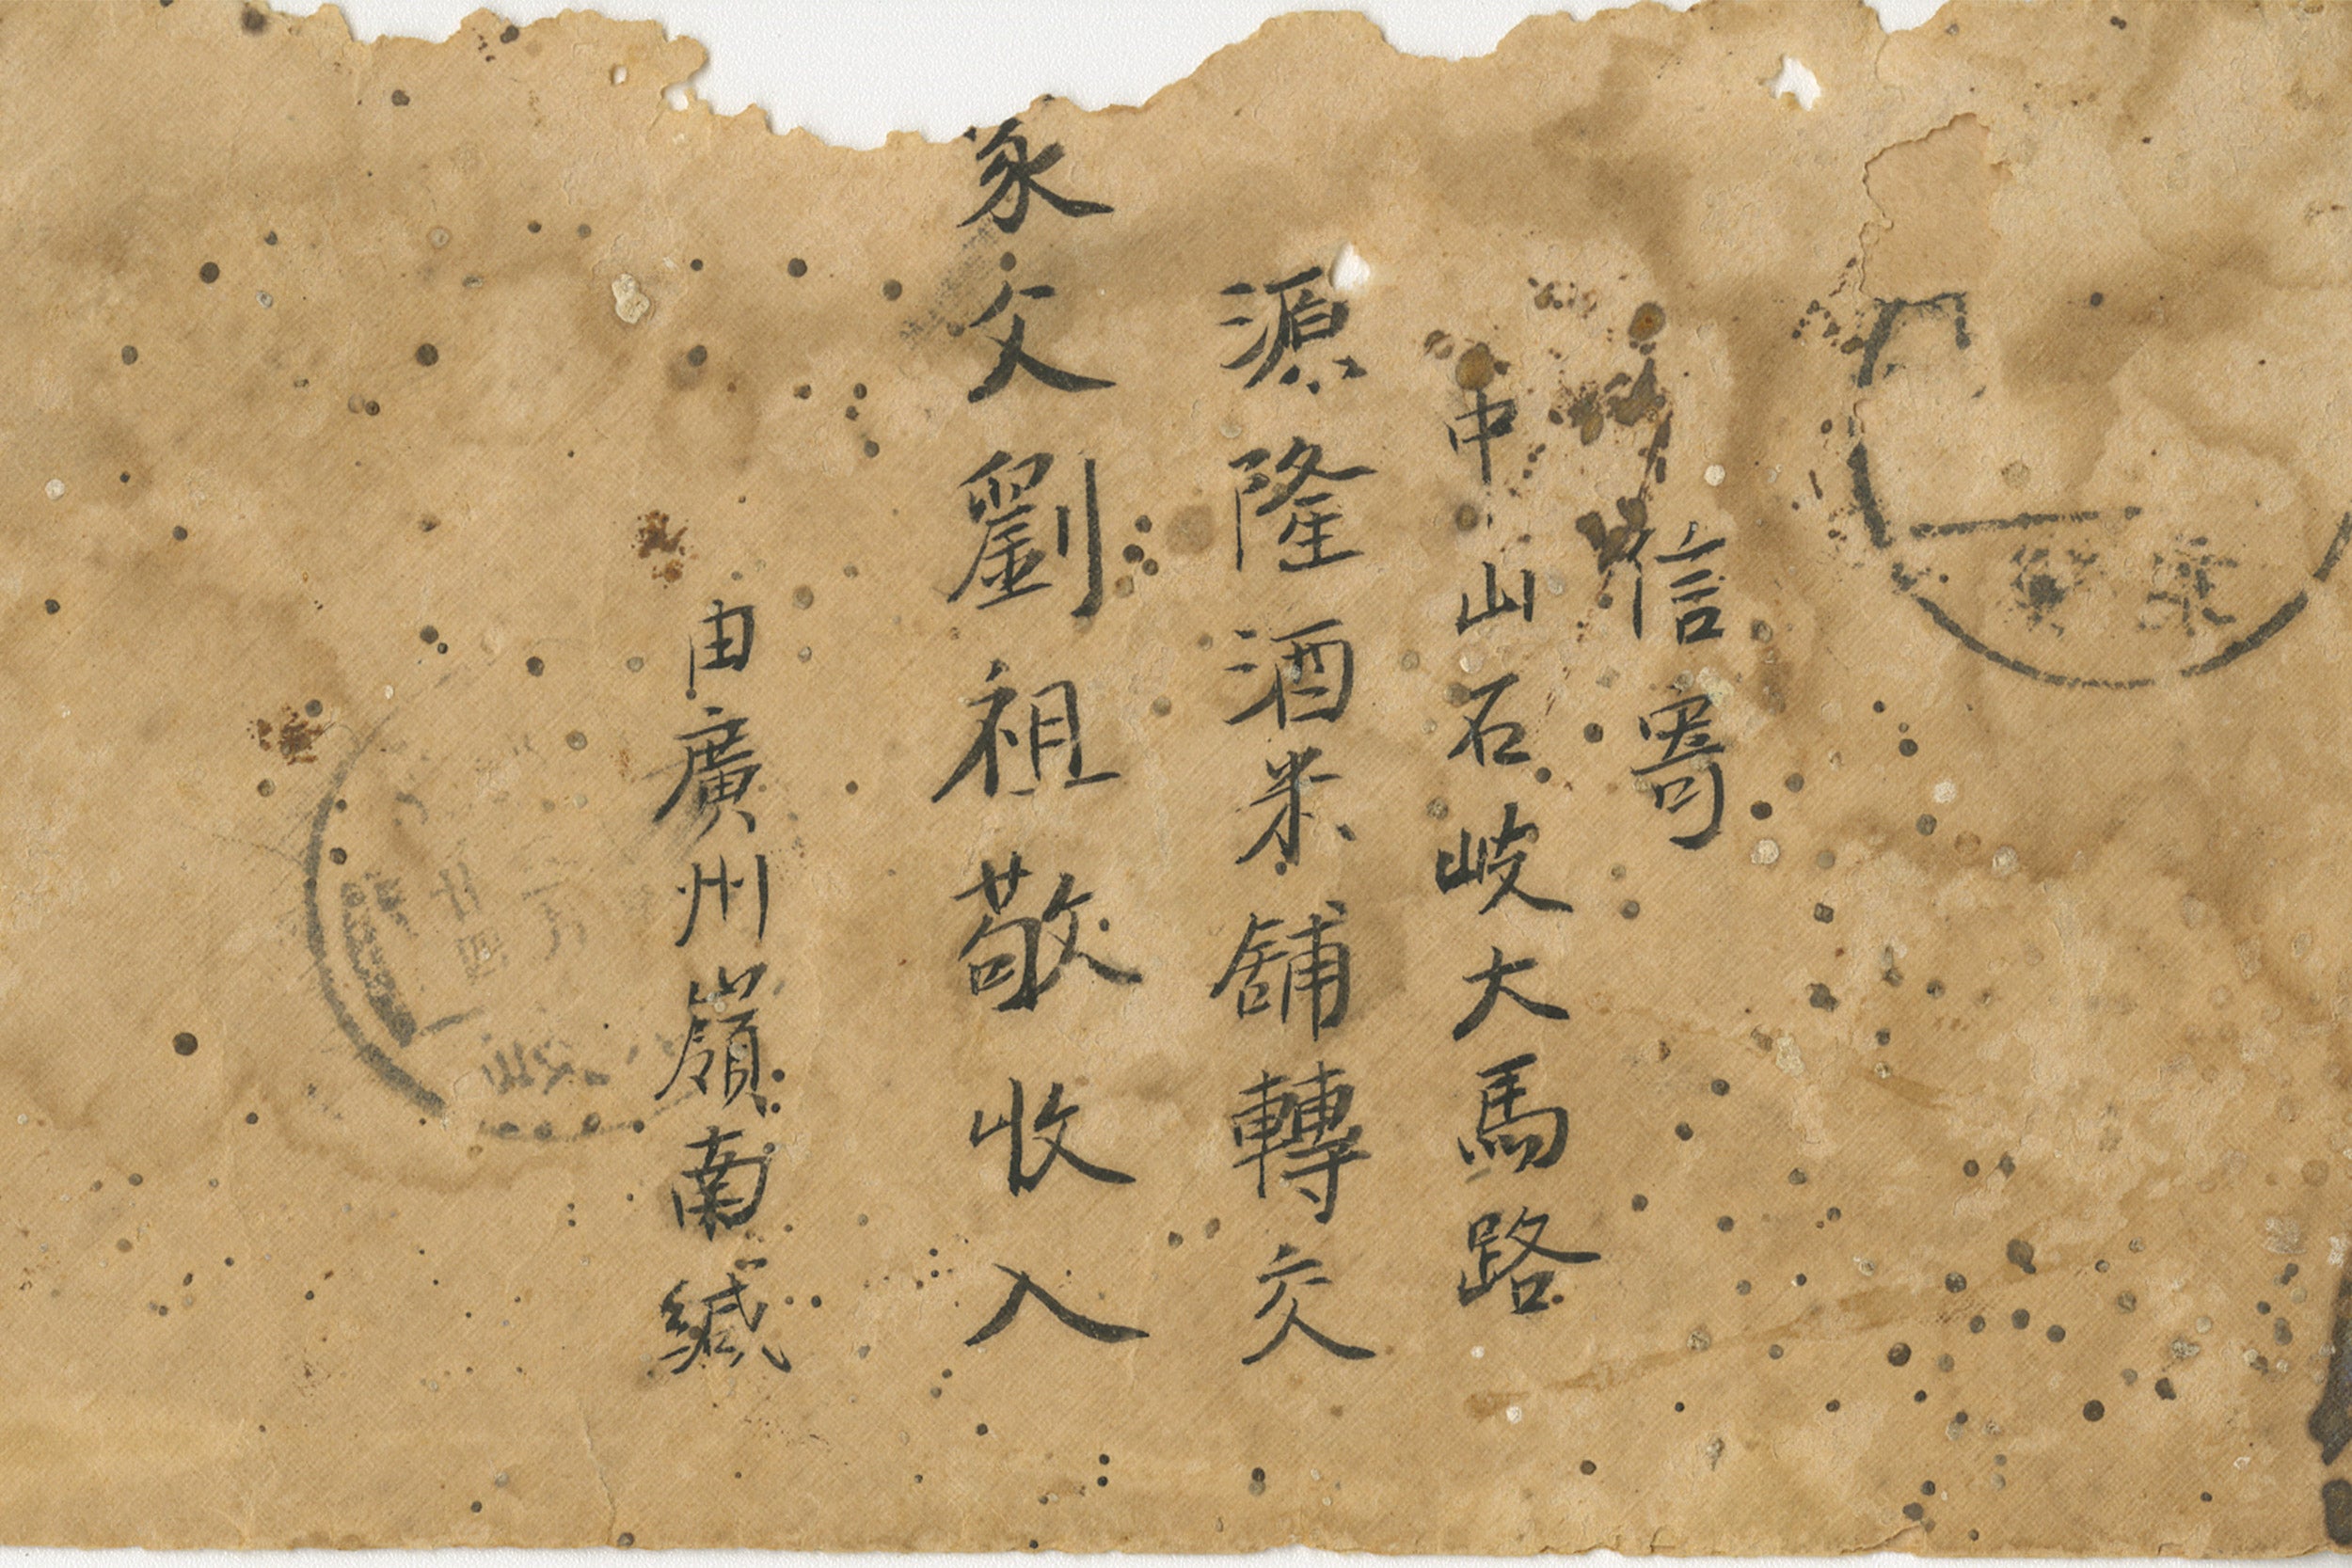 Paper with Chinese script on it.